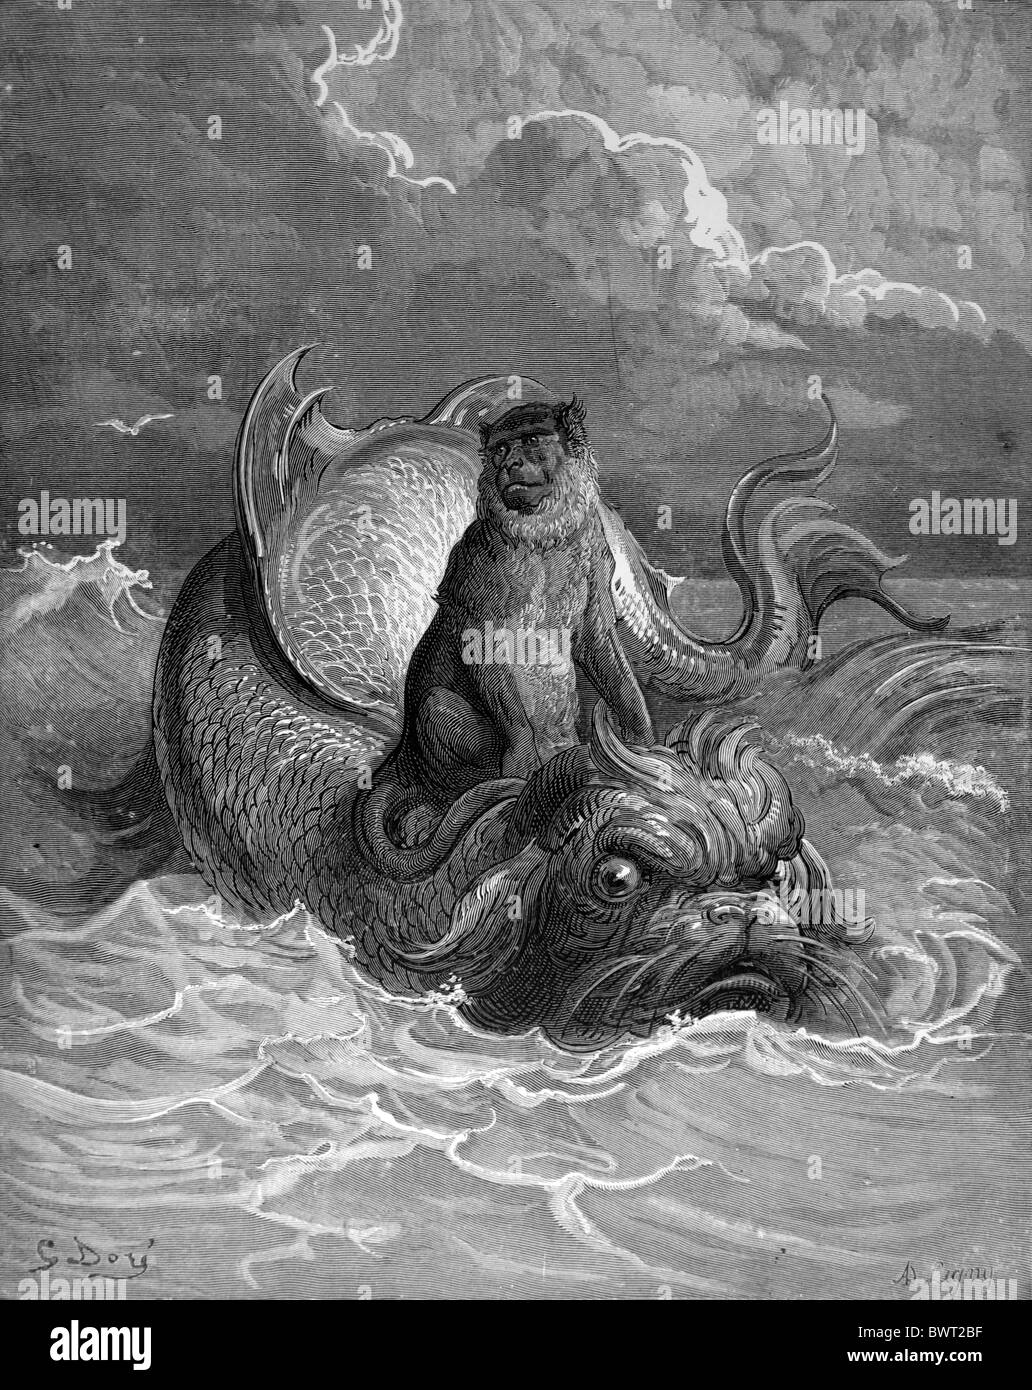 Gustave Doré; The Monkey and the Dolphin from Jean de la Fontaine's Fables; Black and White Engraving Stock Photo